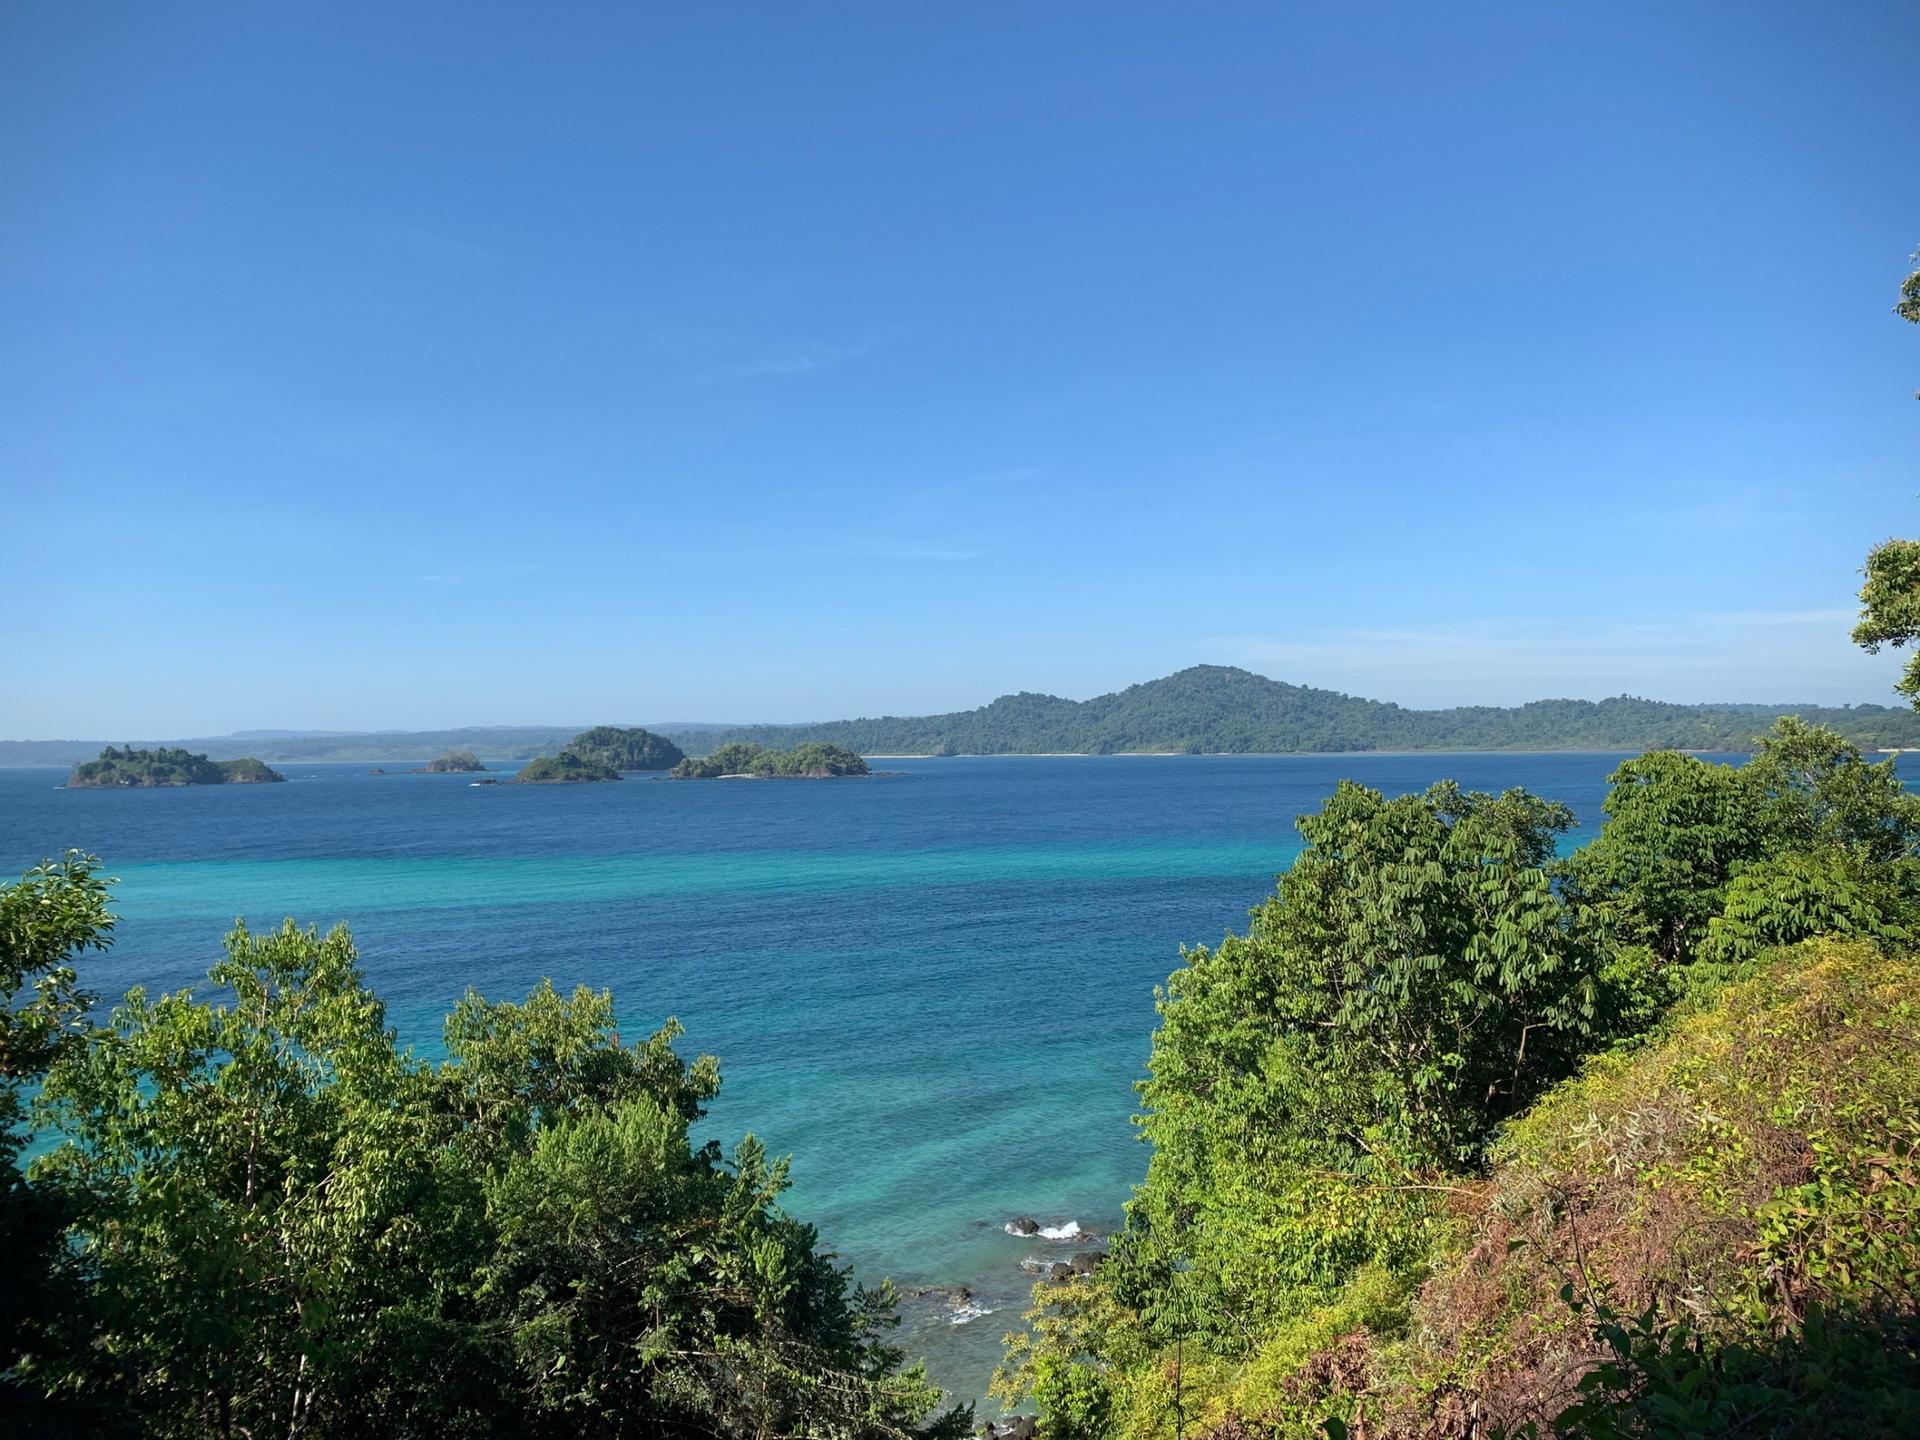 A view of the blue ocean from framed with the lush green forests of Coiba National Park.